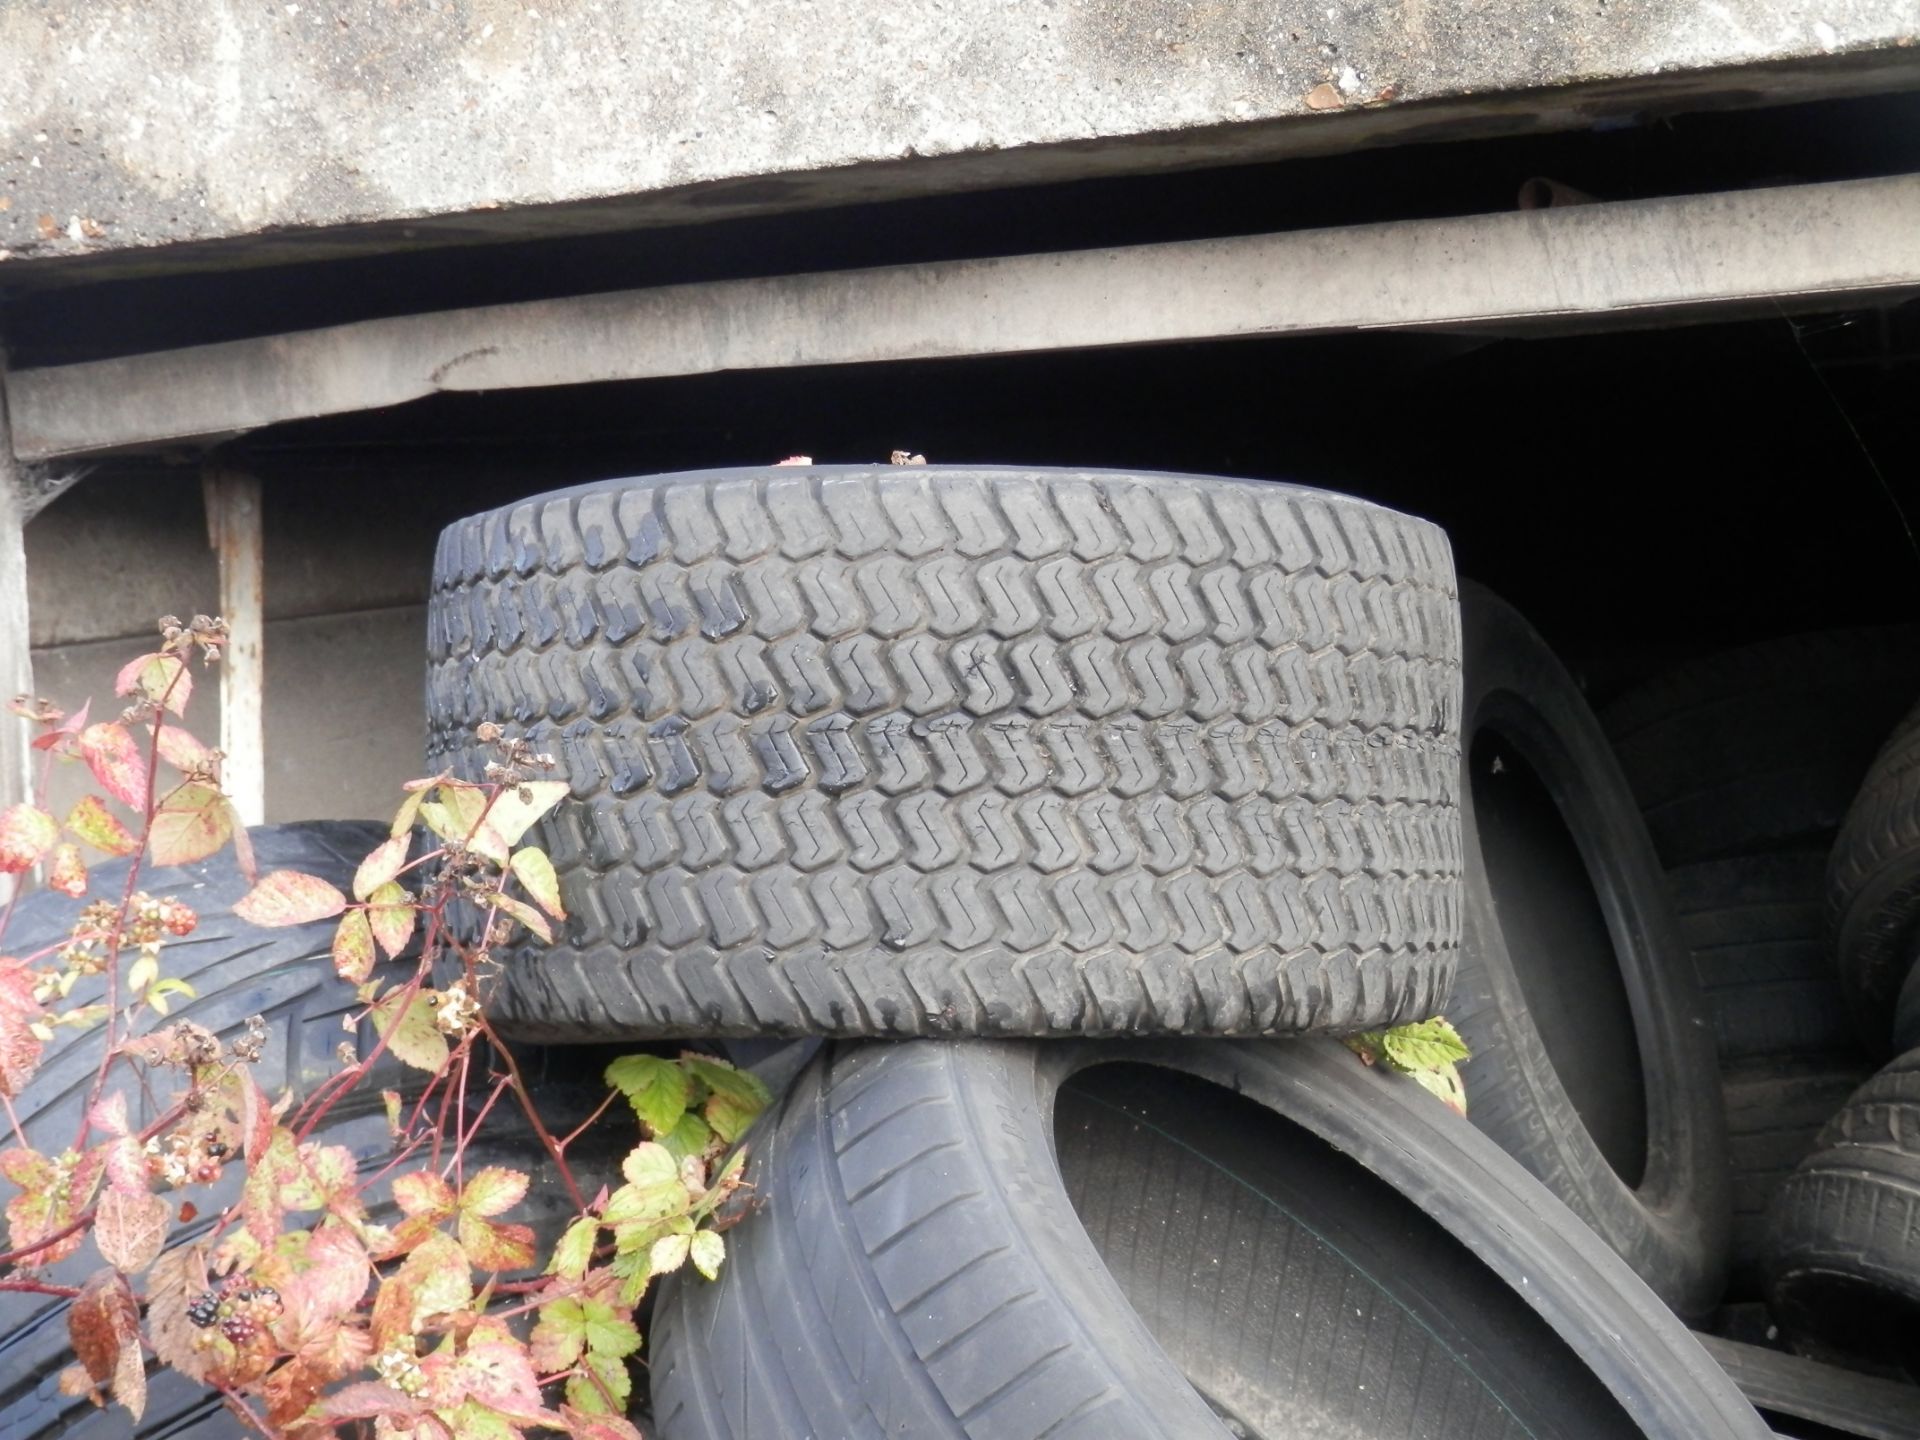 3 GARAGES FULL OF USED, PART WORN TYRES. ASSORTED FROM CAR TO LORRY TYRES. POSSIBLY 800+ - Image 7 of 9